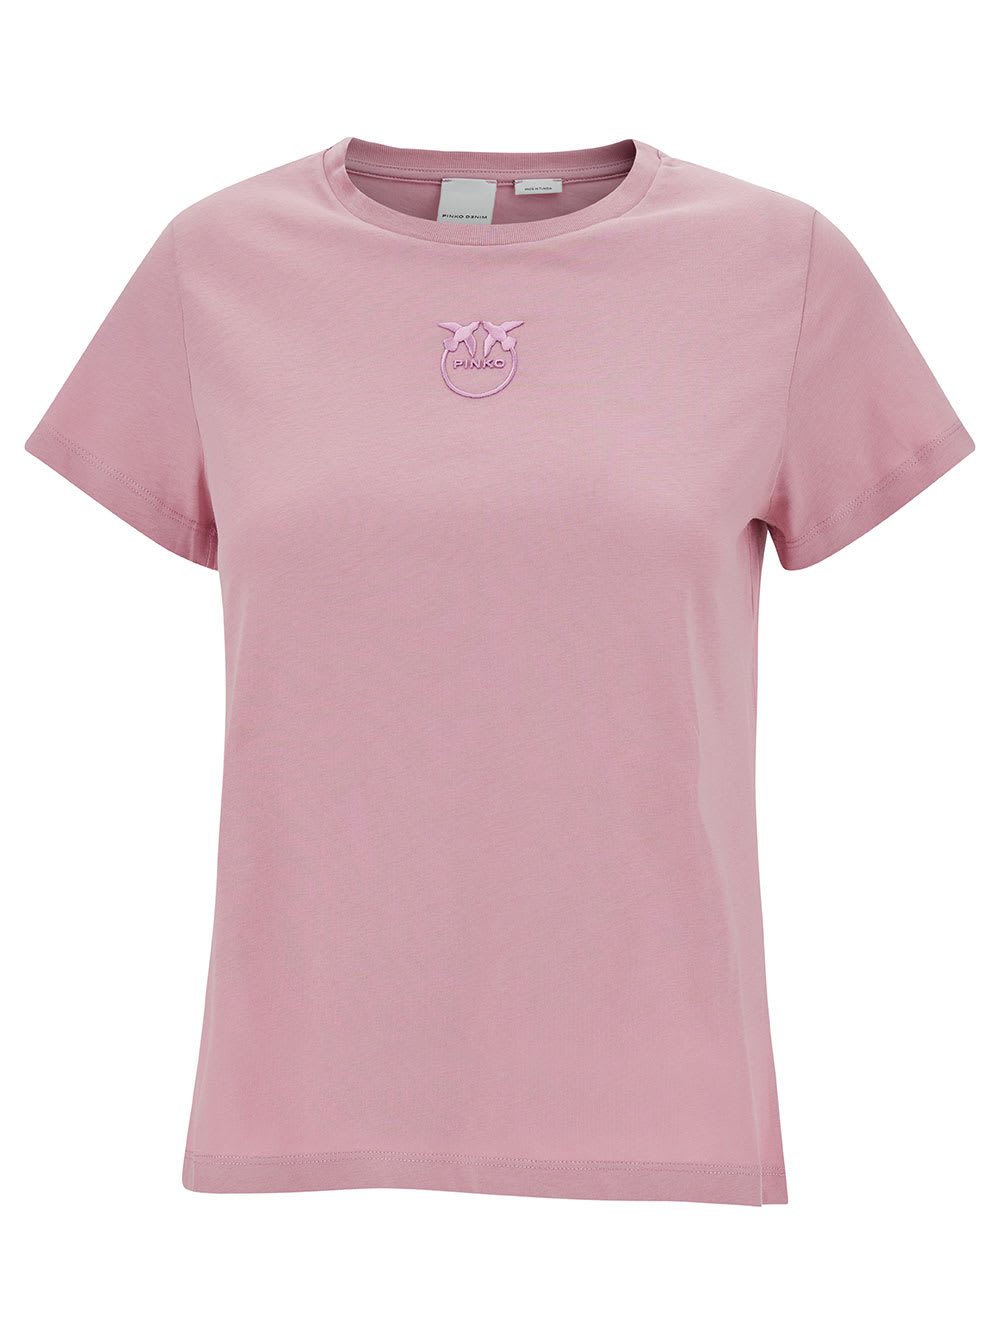 PINKO PINK CREWNECK T-SHIRT WITH LOVE BIRDS EMBROIDERY IN COTTON WOMAN